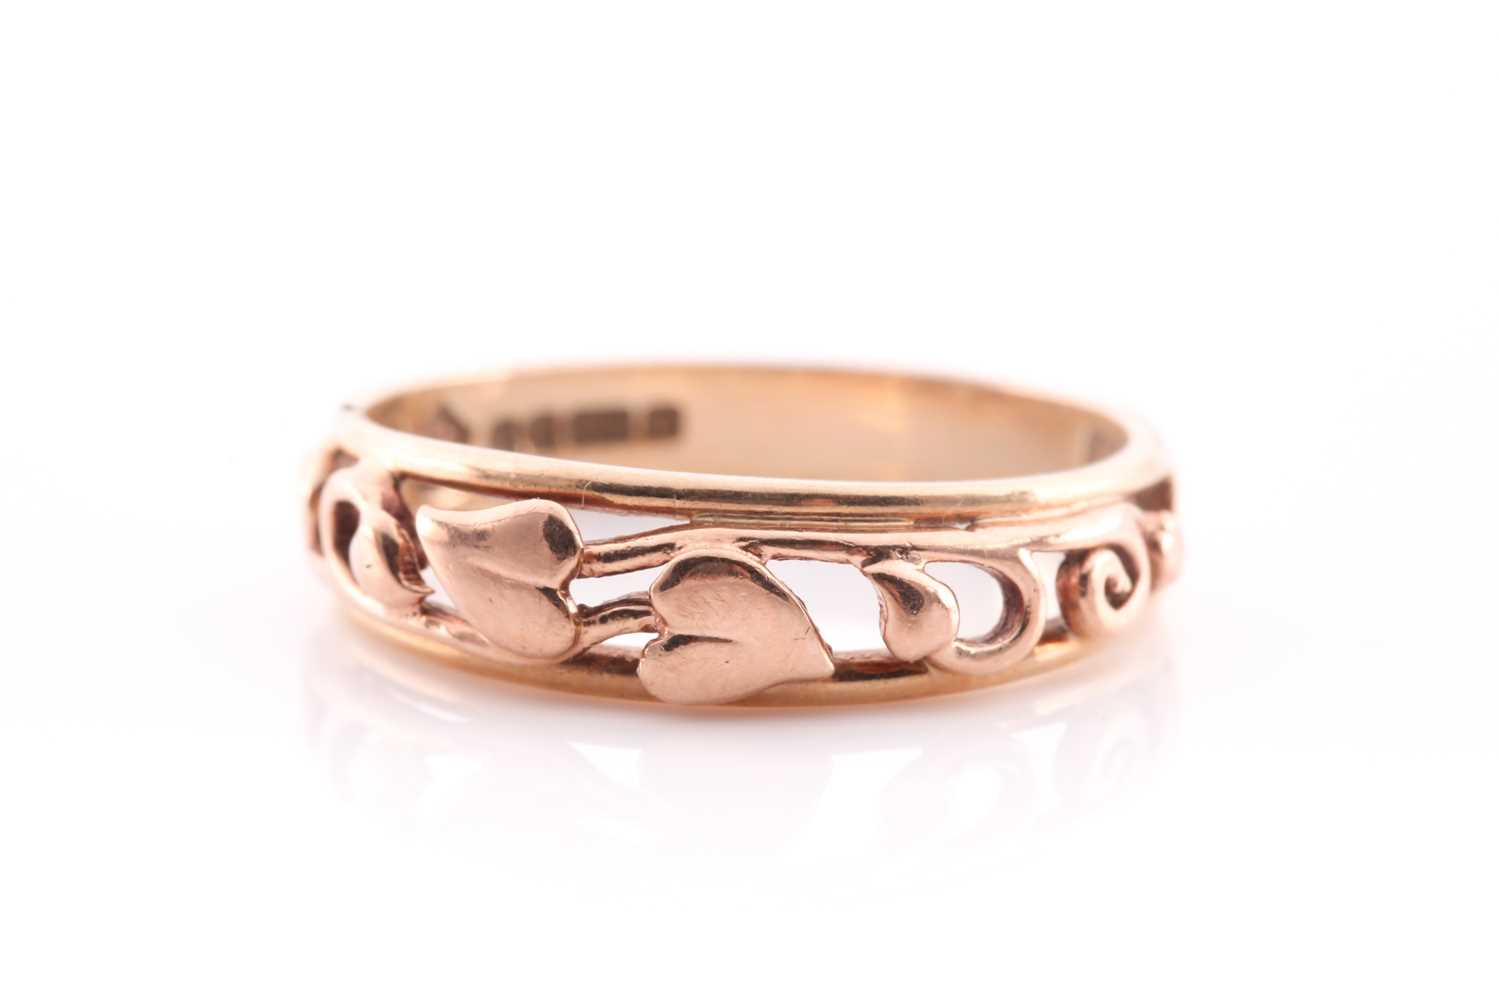 Lot 234 A 9 Ct And Rose Gold Clogau Band Ring Size